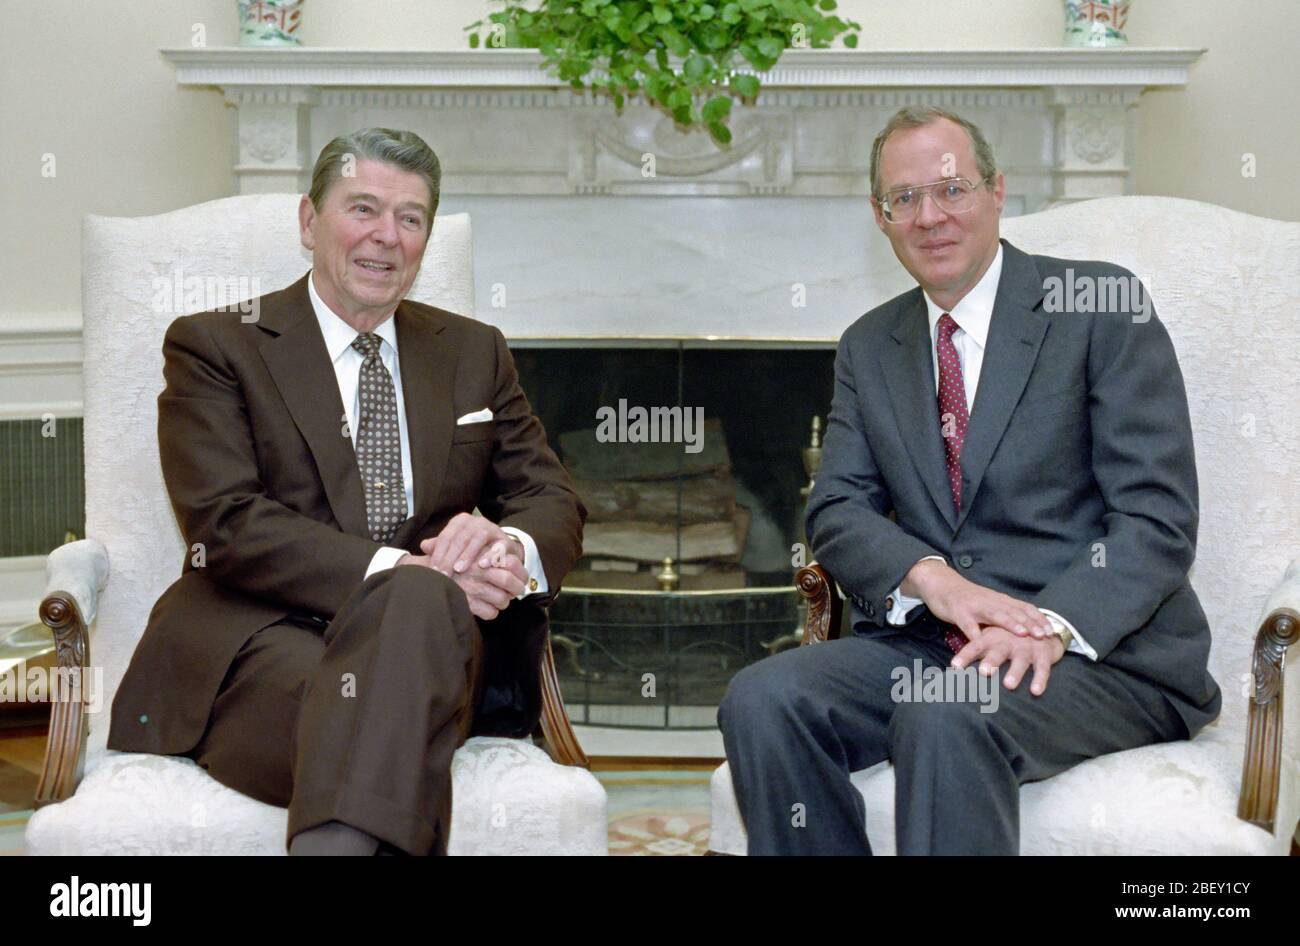 11/11/1987 President Reagan meeting with Judge Anthony Kennedy in the Oval Office Stock Photo